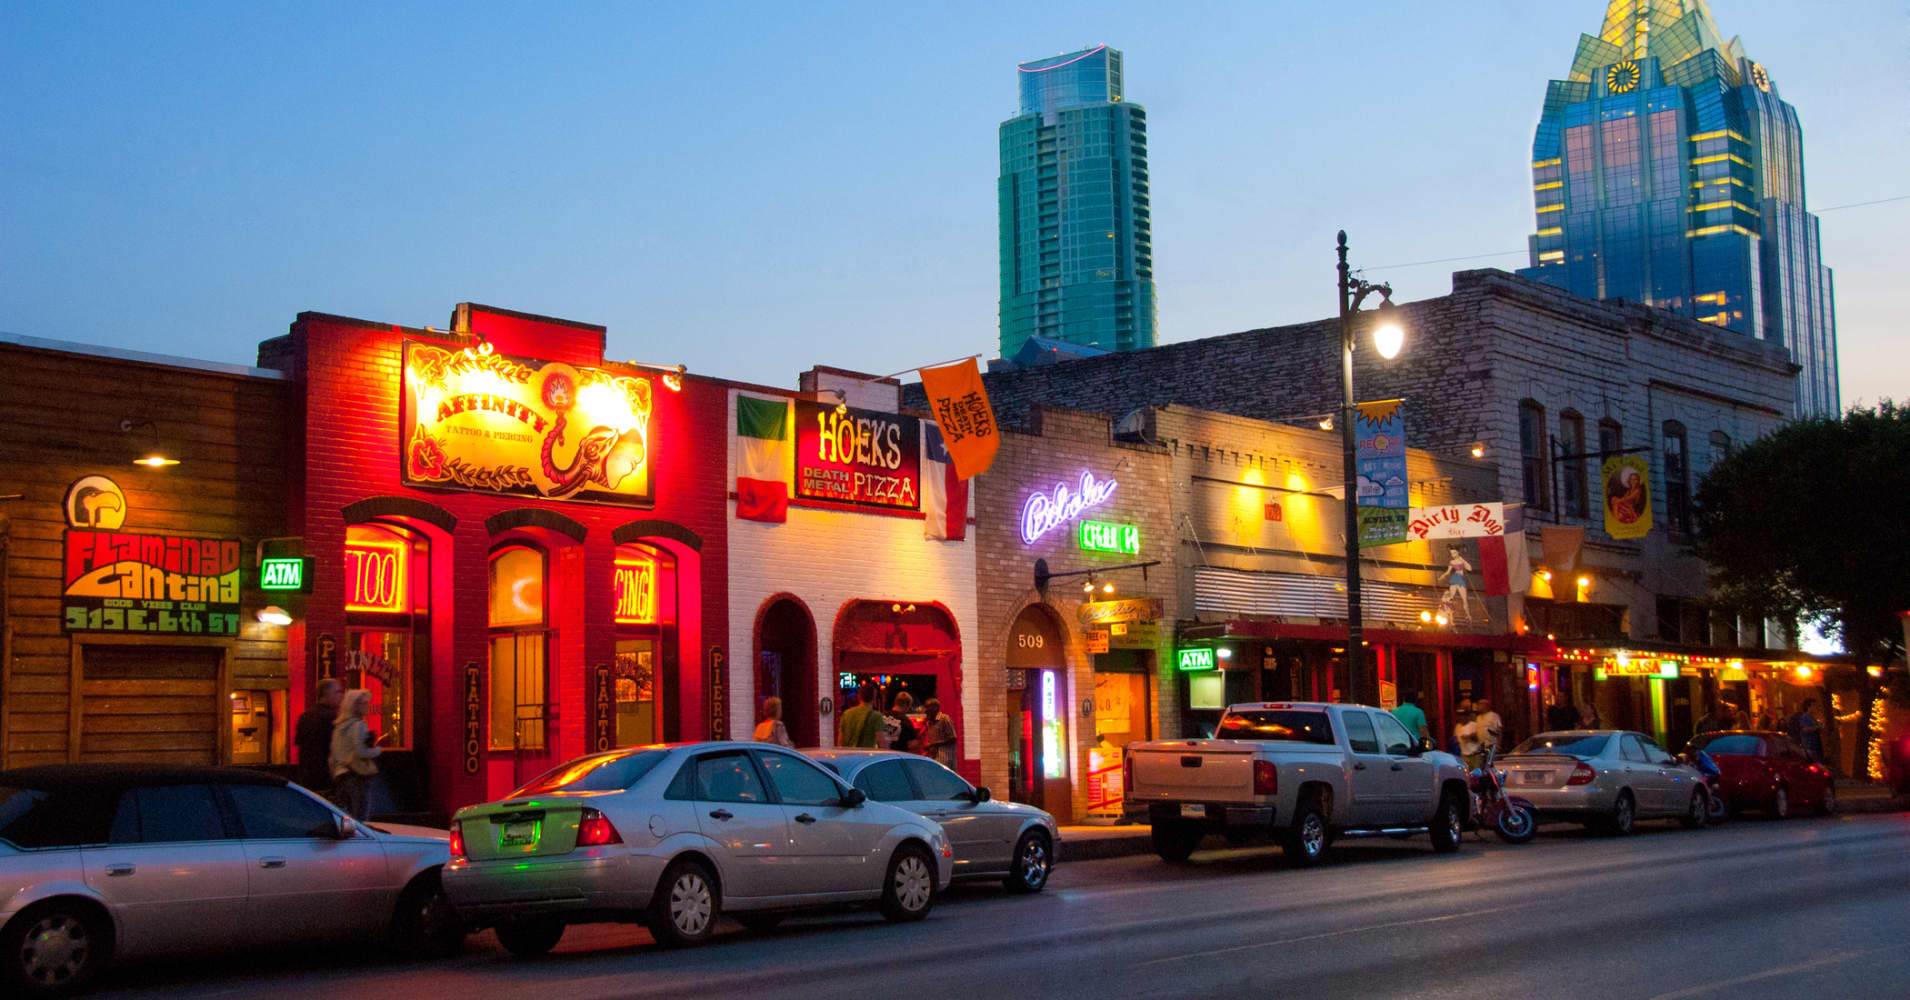 Austin is top place for startups in America not Silicon Valley